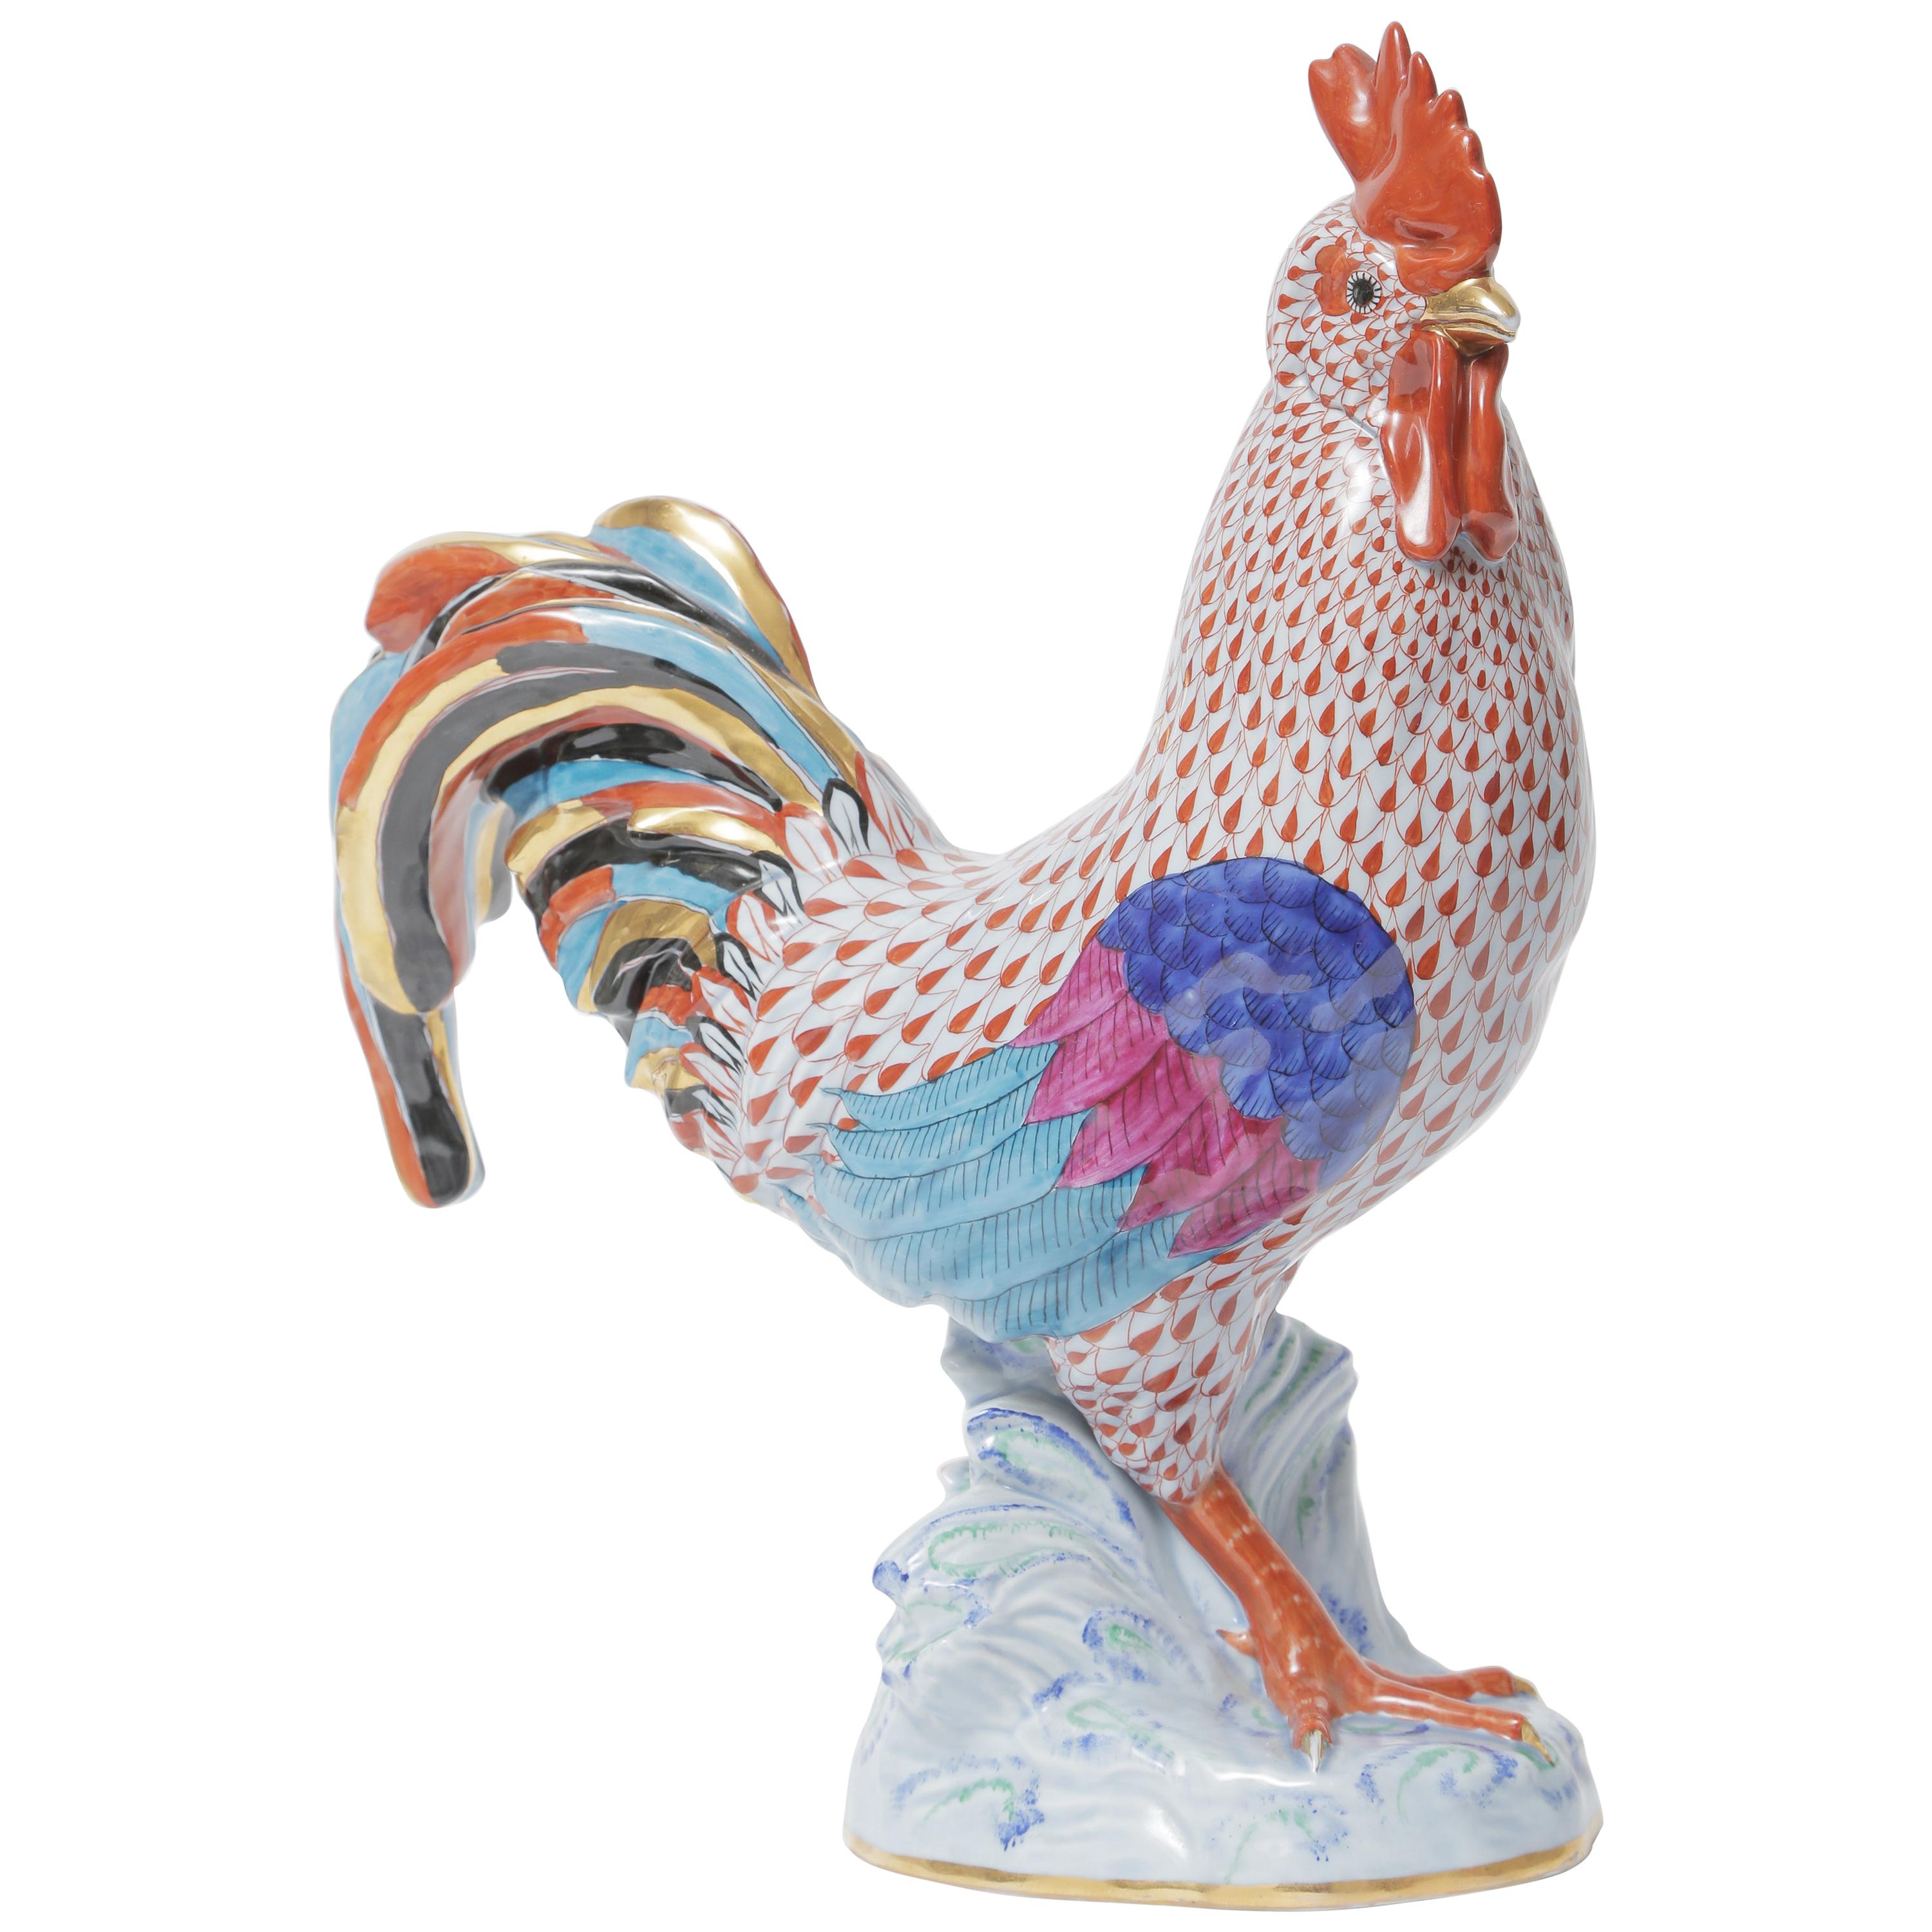 Rare Largest Sized Herend Rooster Figurine. Cobalt Porcelain Hand Painted